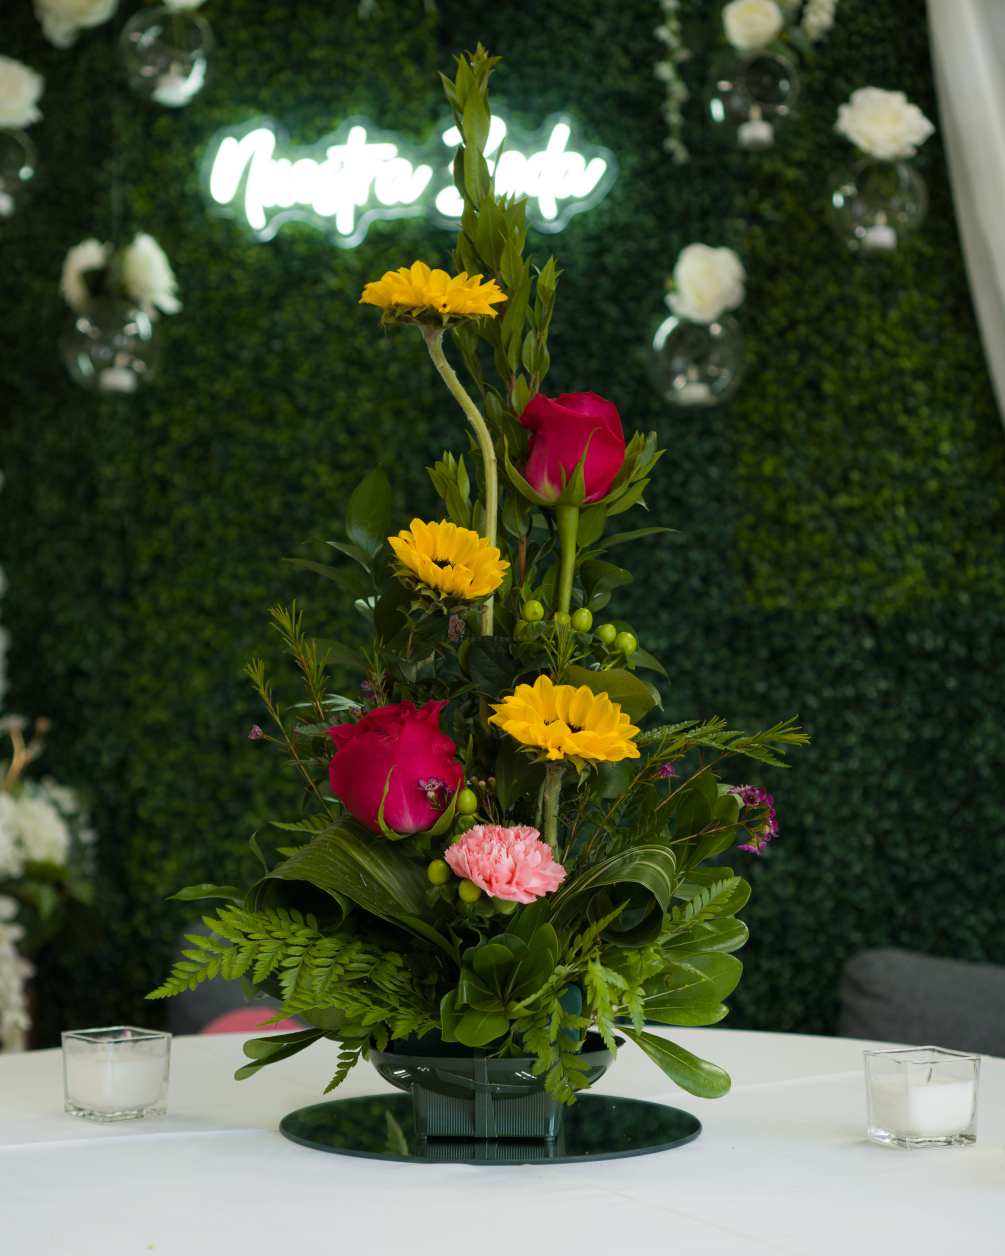 Perfect for adding a burst of color to any setting, this arrangement